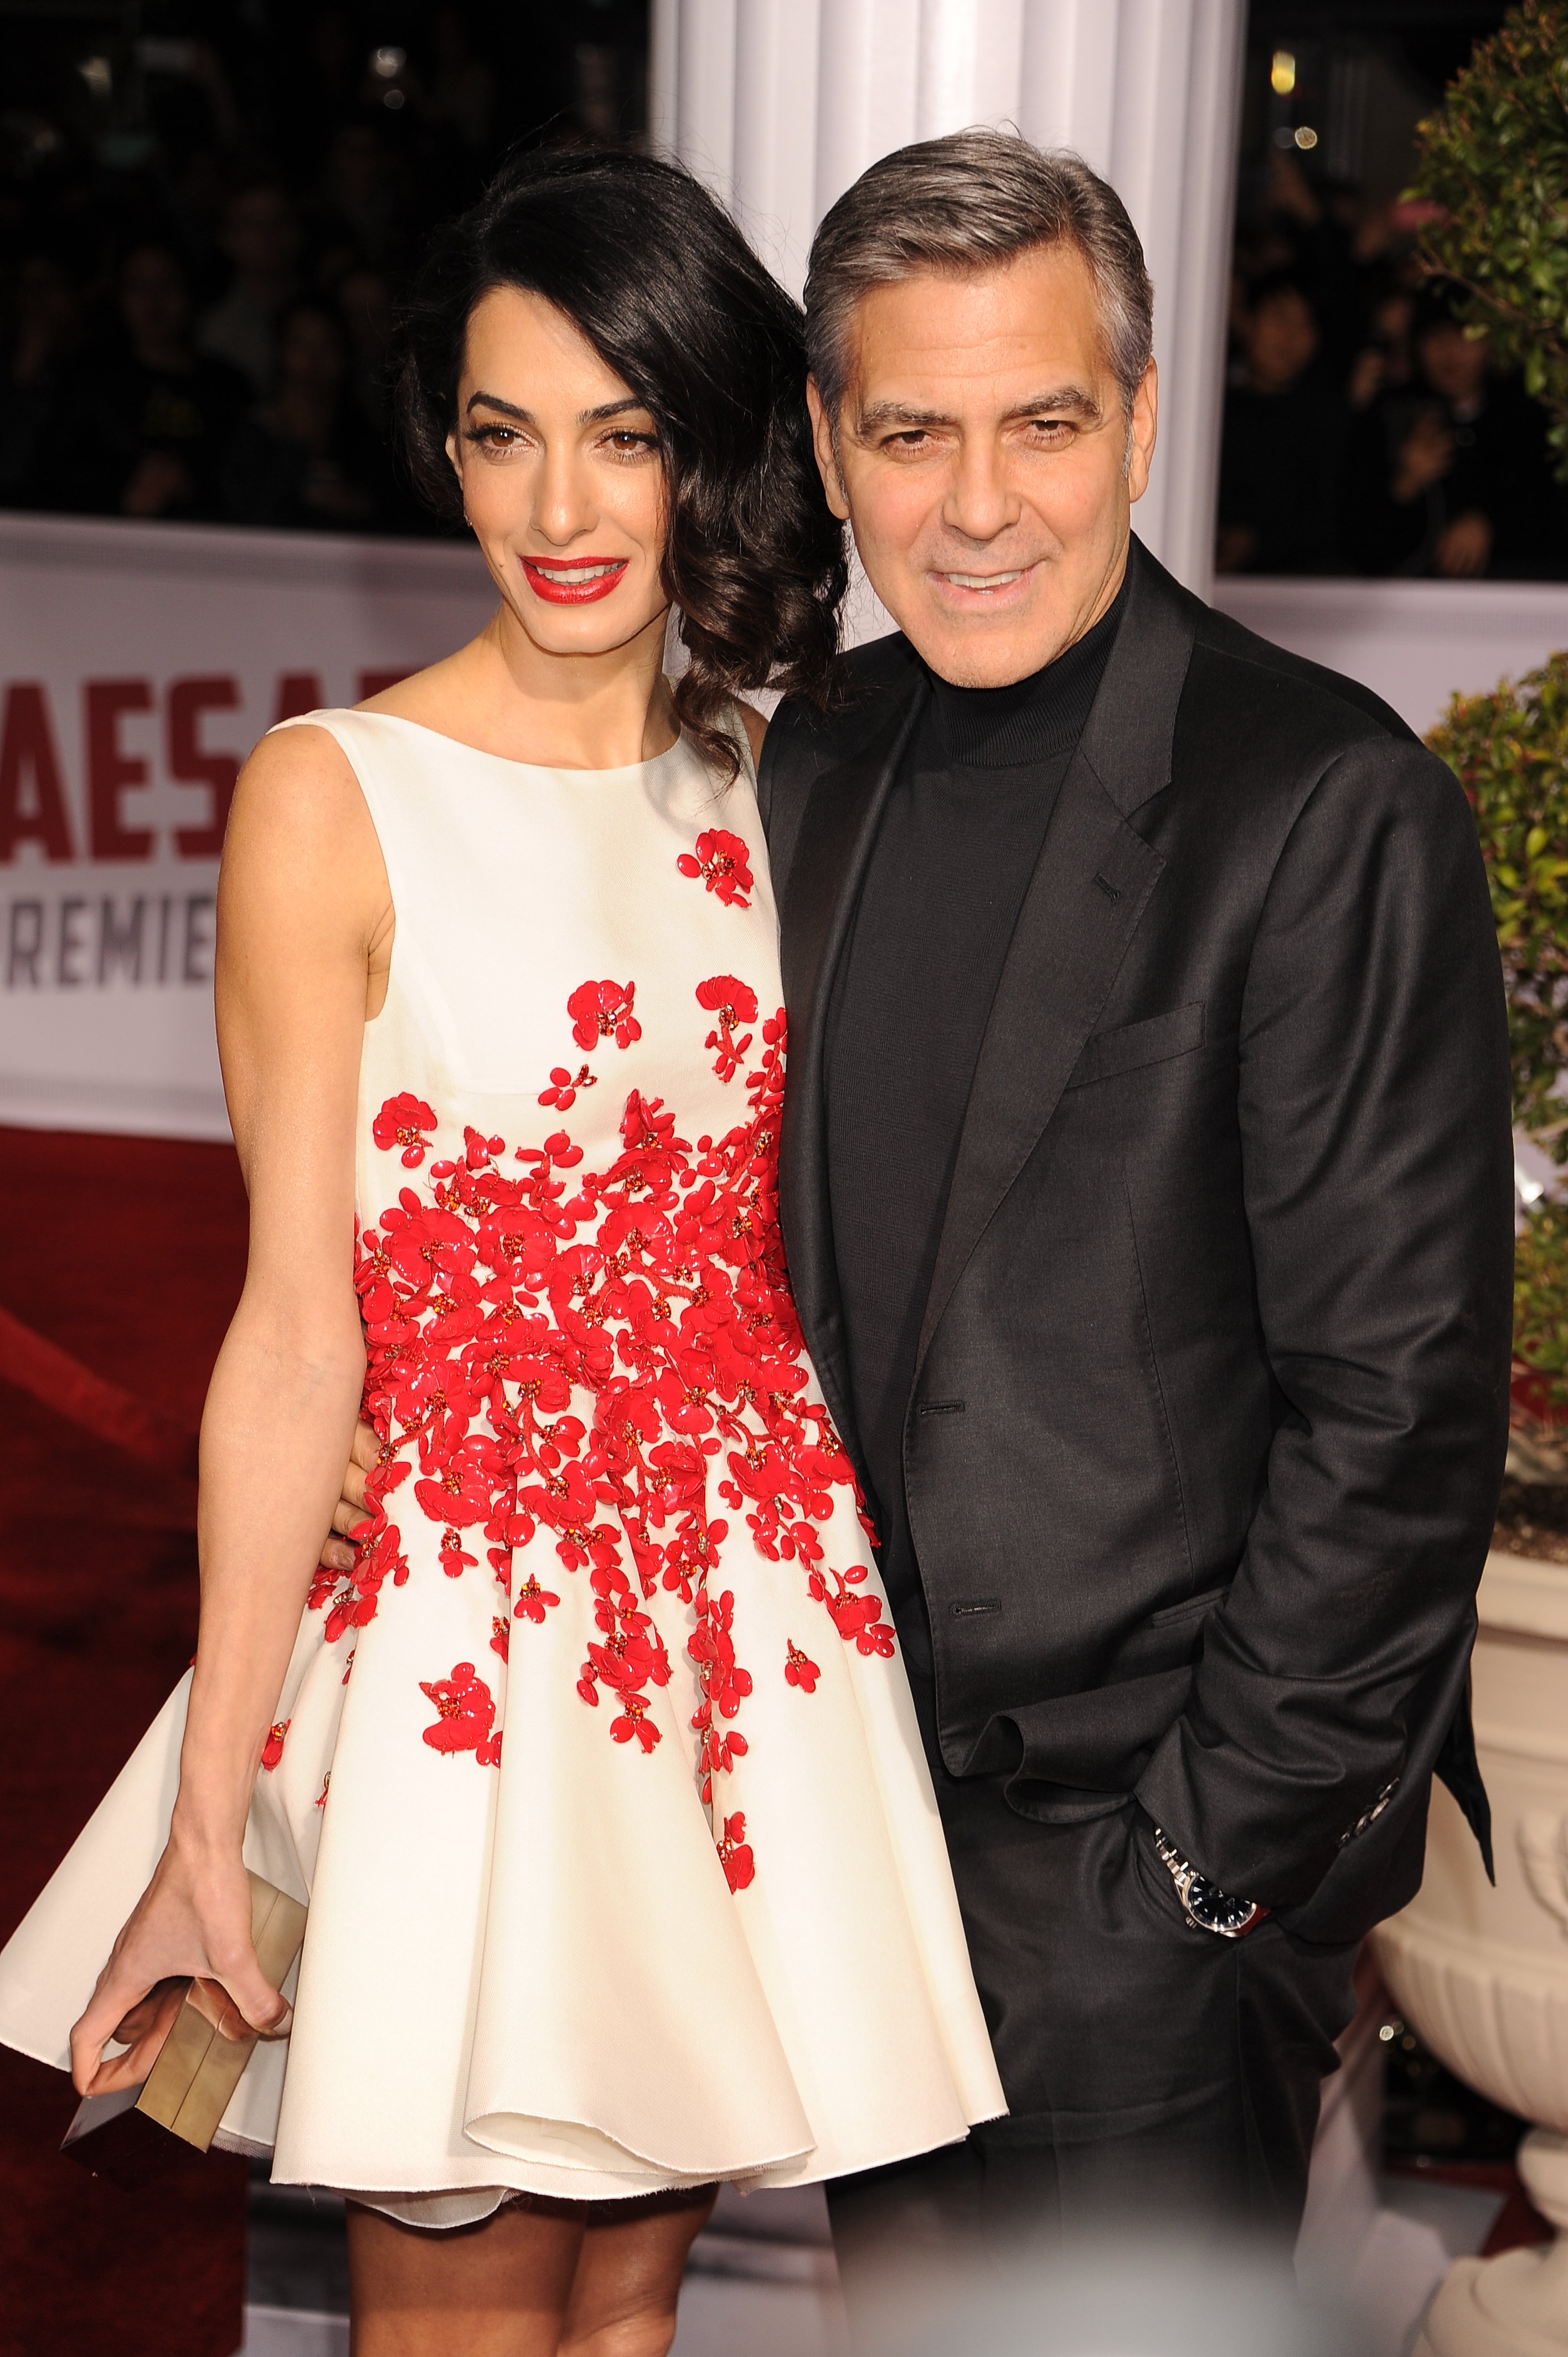 Amal and George Clooney at the premiere of "Hail Caesar!" in Westwood in 2016. | Source: Getty Images